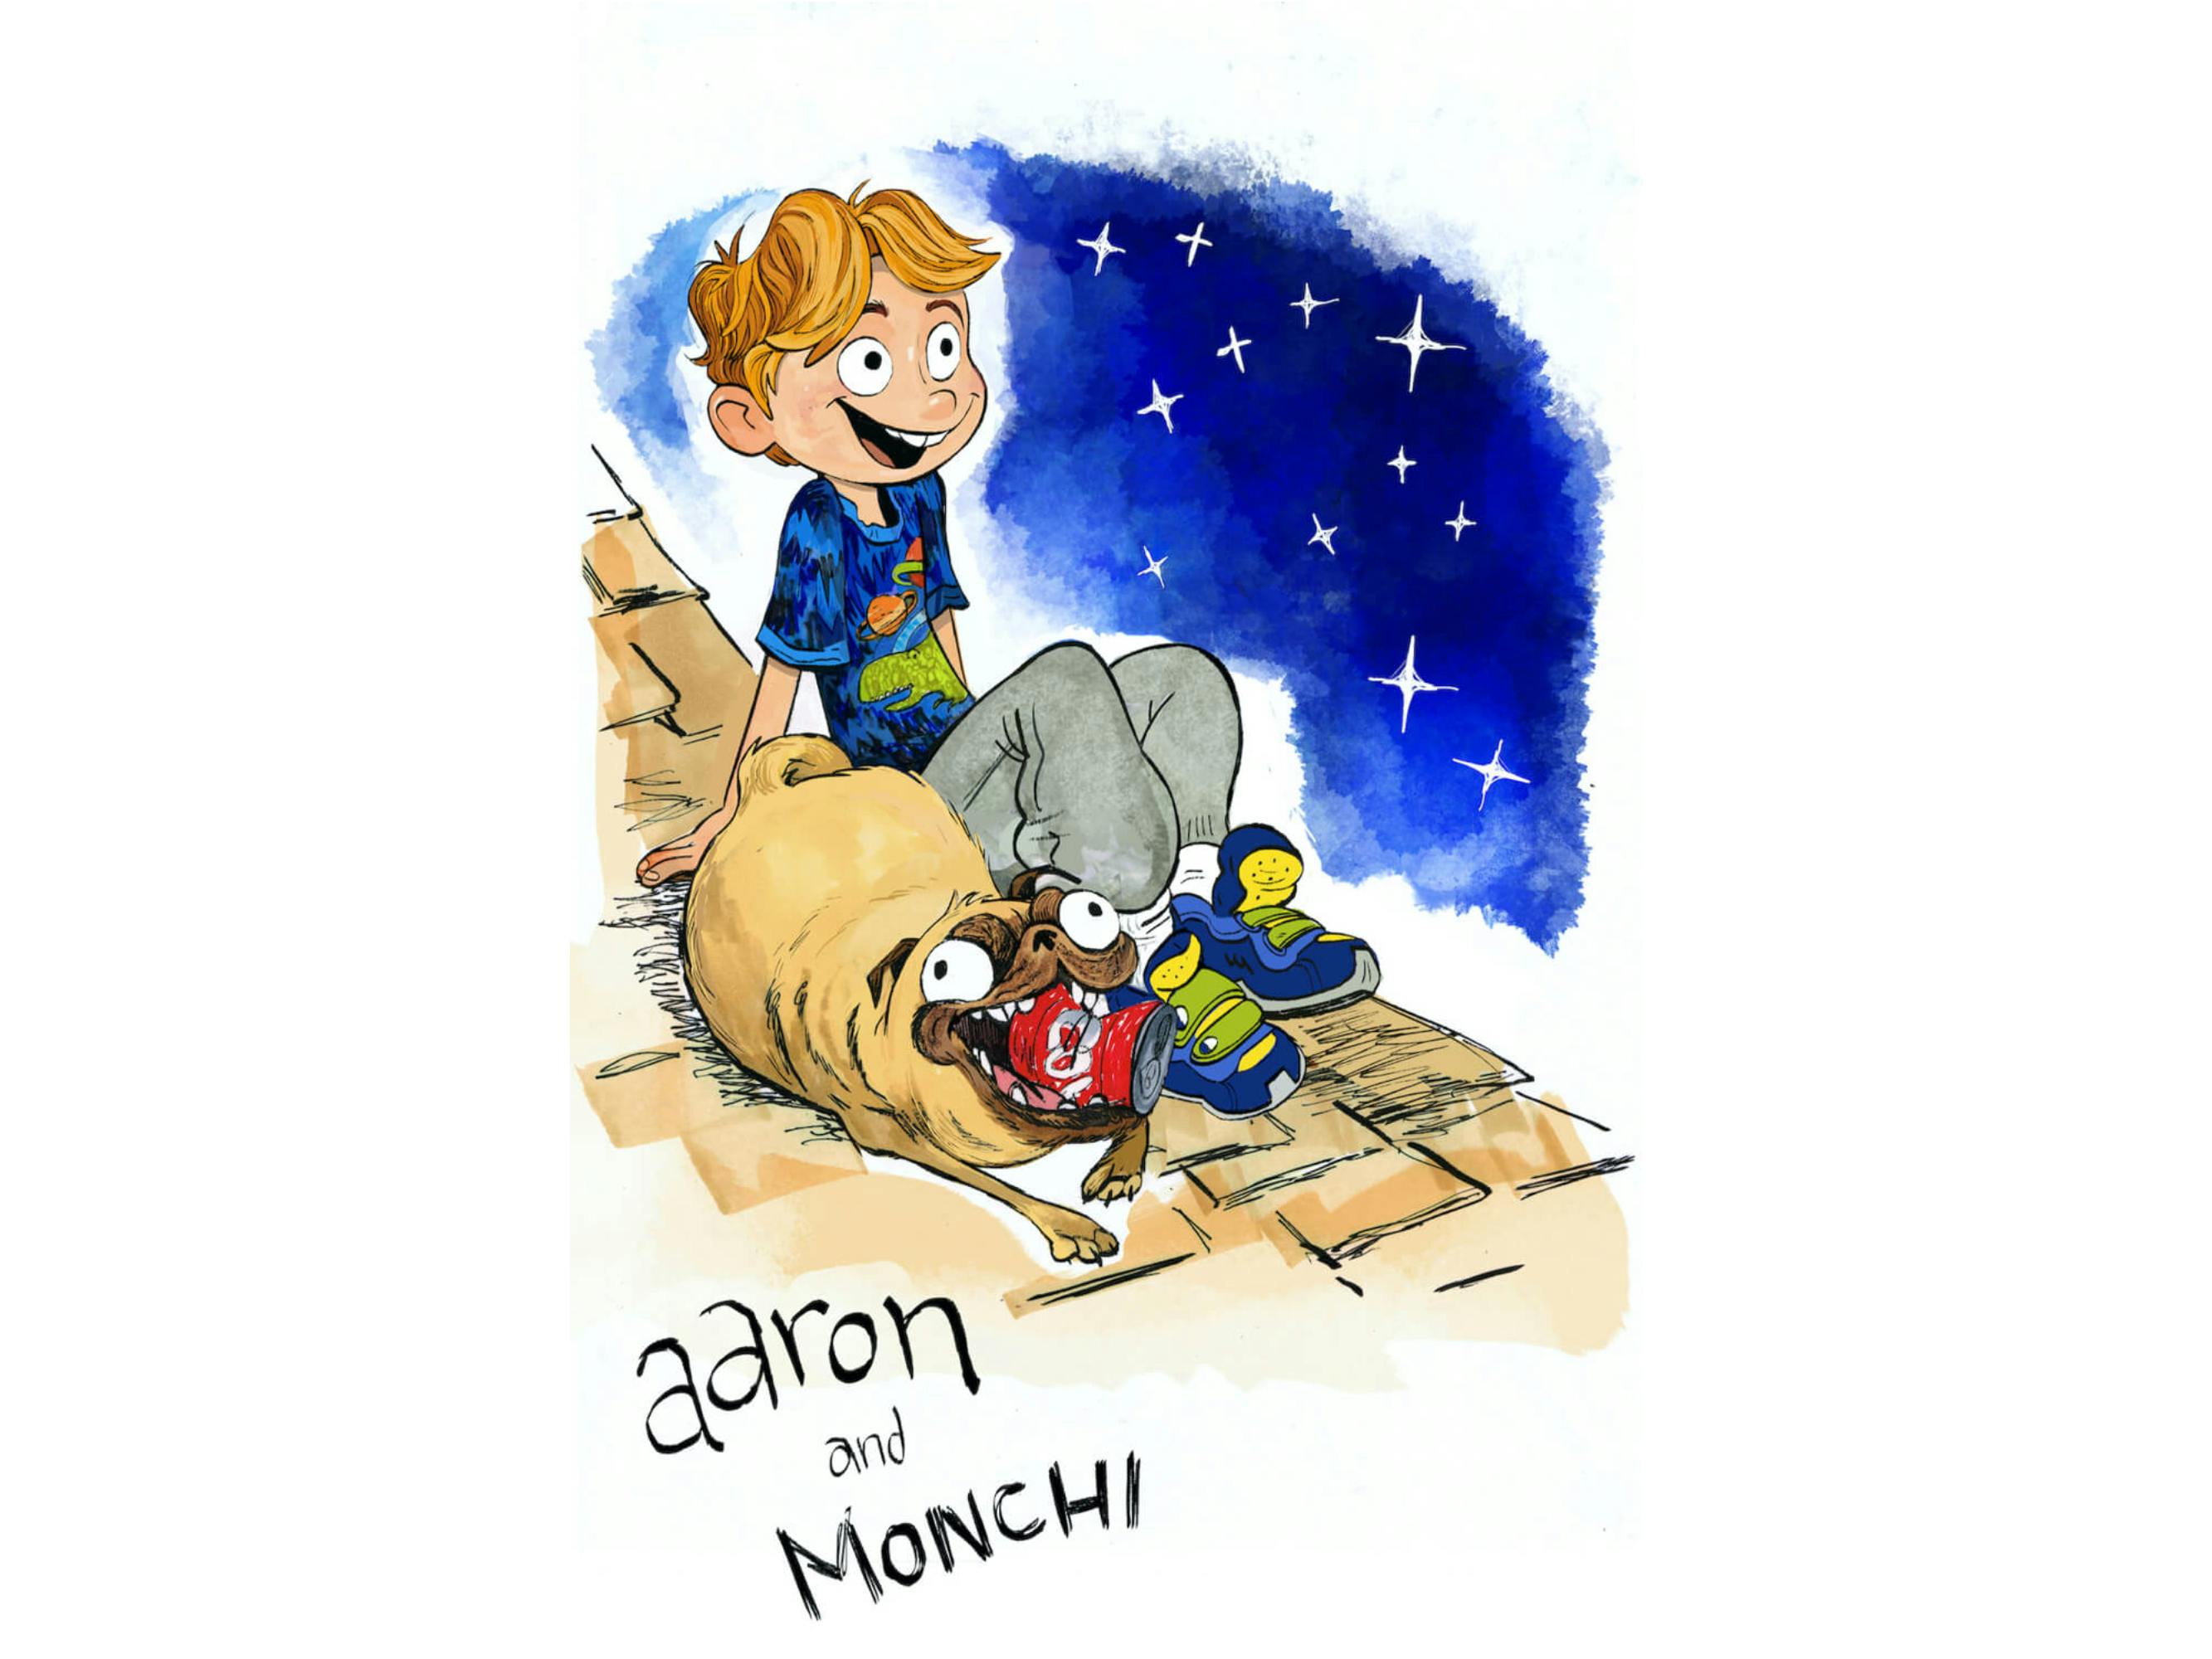 Aaron and Monchi sit on a roof. Aaron wears grey sweats and a blue tshirt. Monchi chews on a red can. The royal blue sky is dotted with stars.